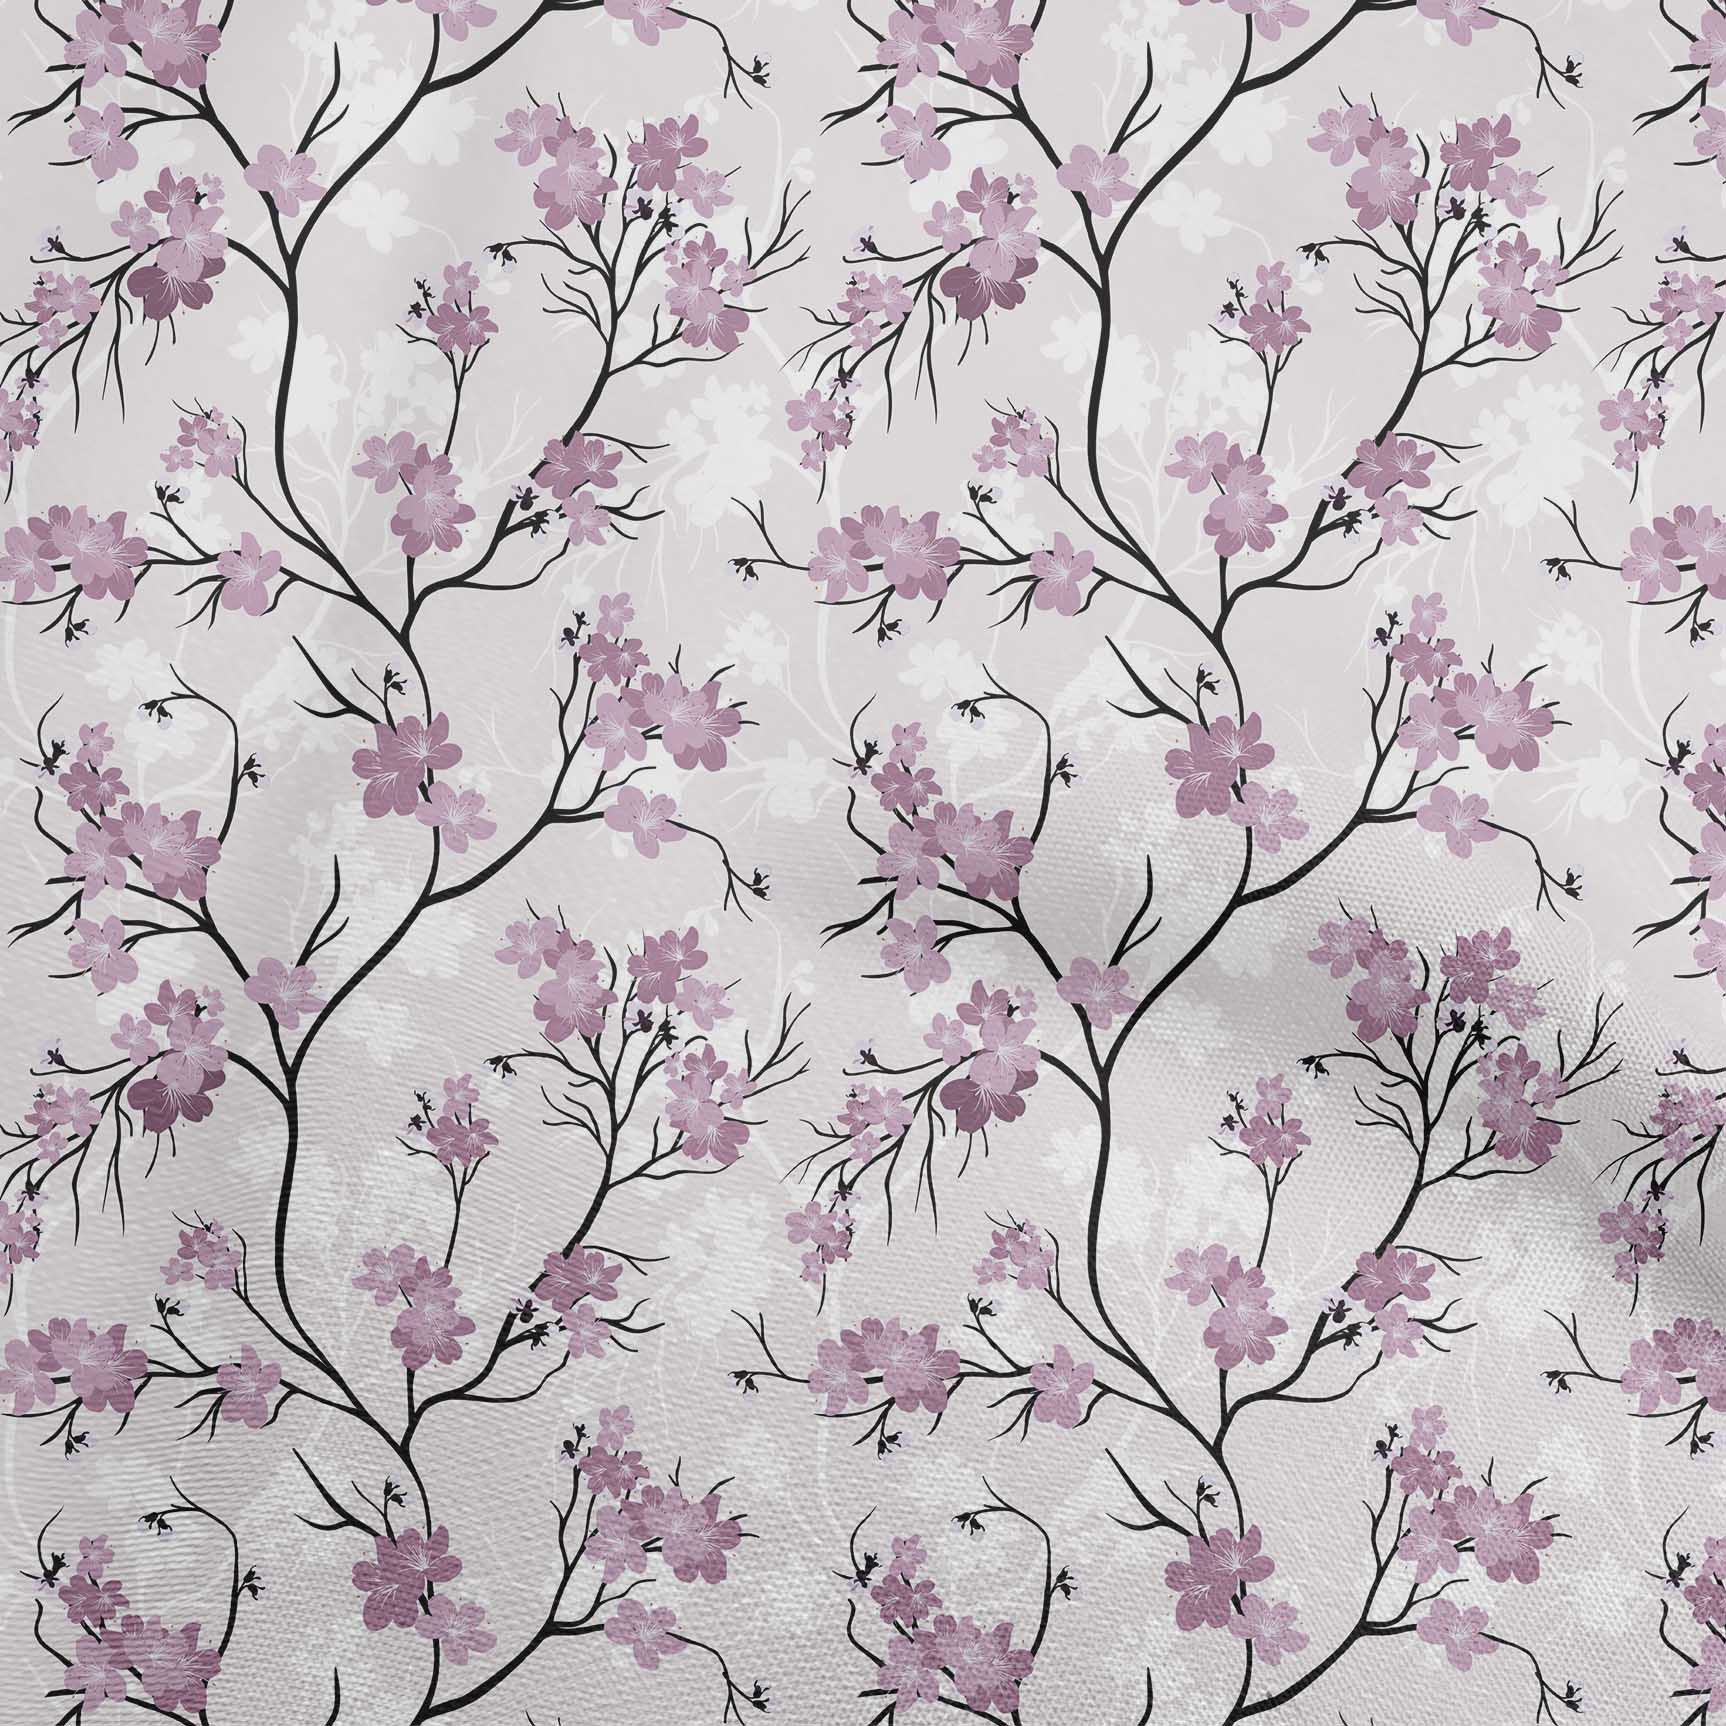 oneOone Cotton Cambric Lavender Fabric Floral Fabric For Sewing Printed Craft Fabric By The Yard 56 Inch Wide - image 1 of 5